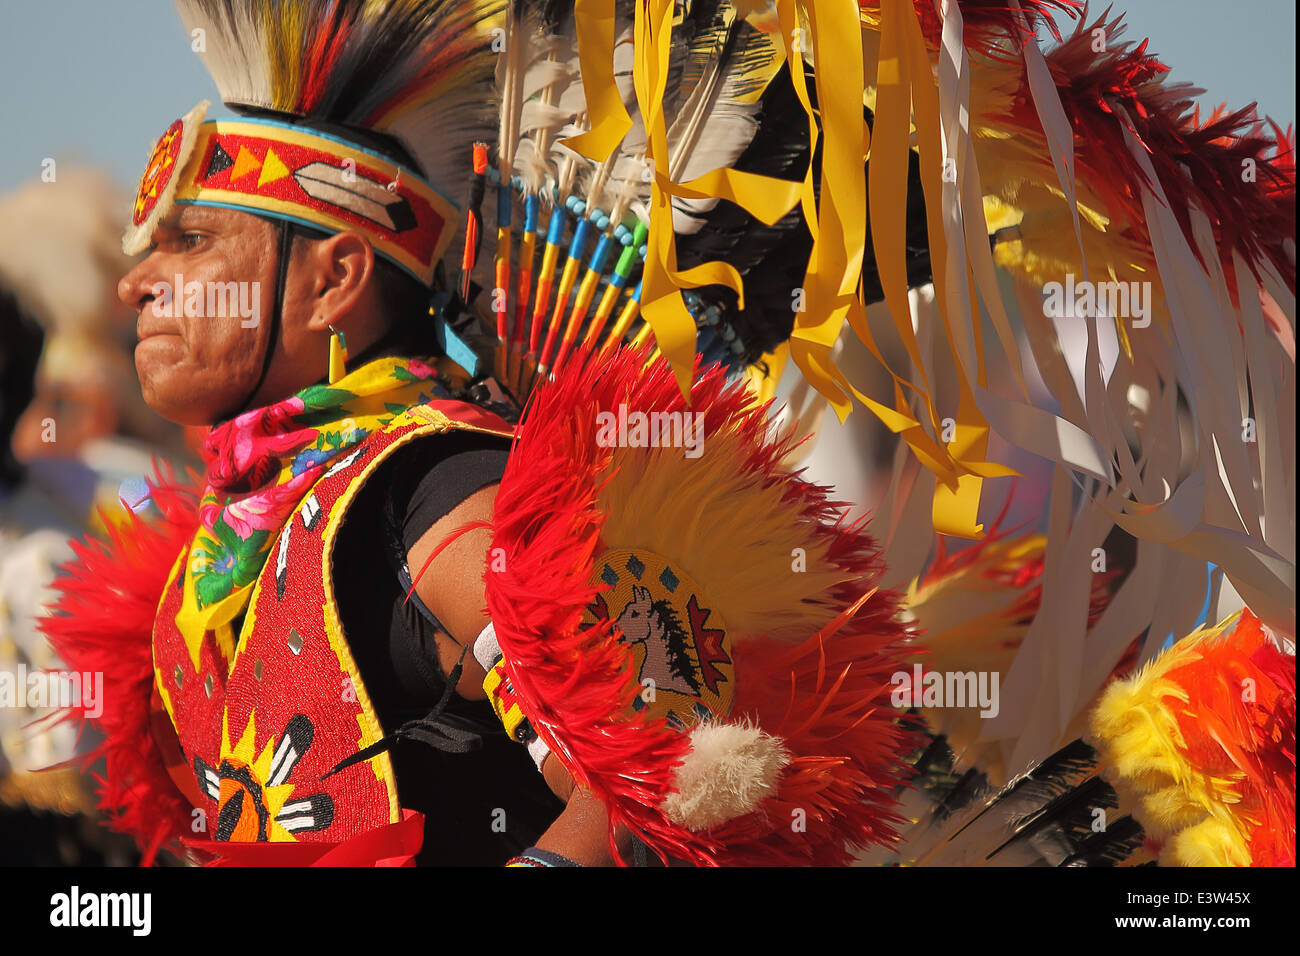 SCOTTSDALE, AZ - NOVEMBER 3: Native American dancers participate in the Annual Red Mountain Eagle Pow-wow Stock Photo